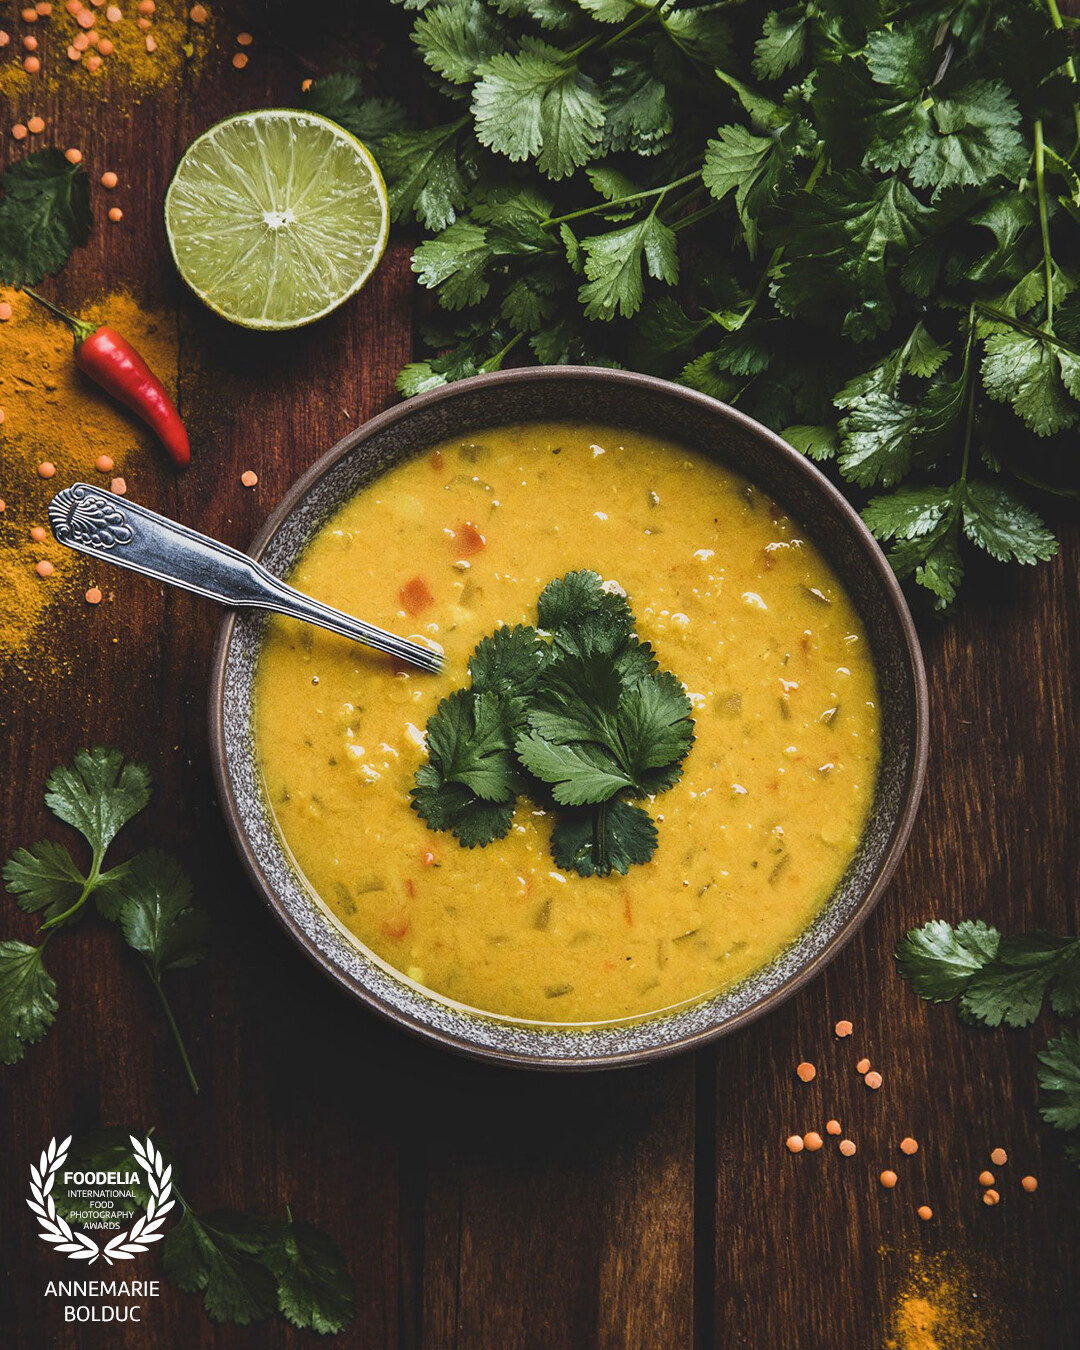 A red lentil curry soup with its ingredients, including an essential for the topping: coriander leaves. My backyard garden is where I source fresh herbs<br />
for the kitchen and for my food photography.